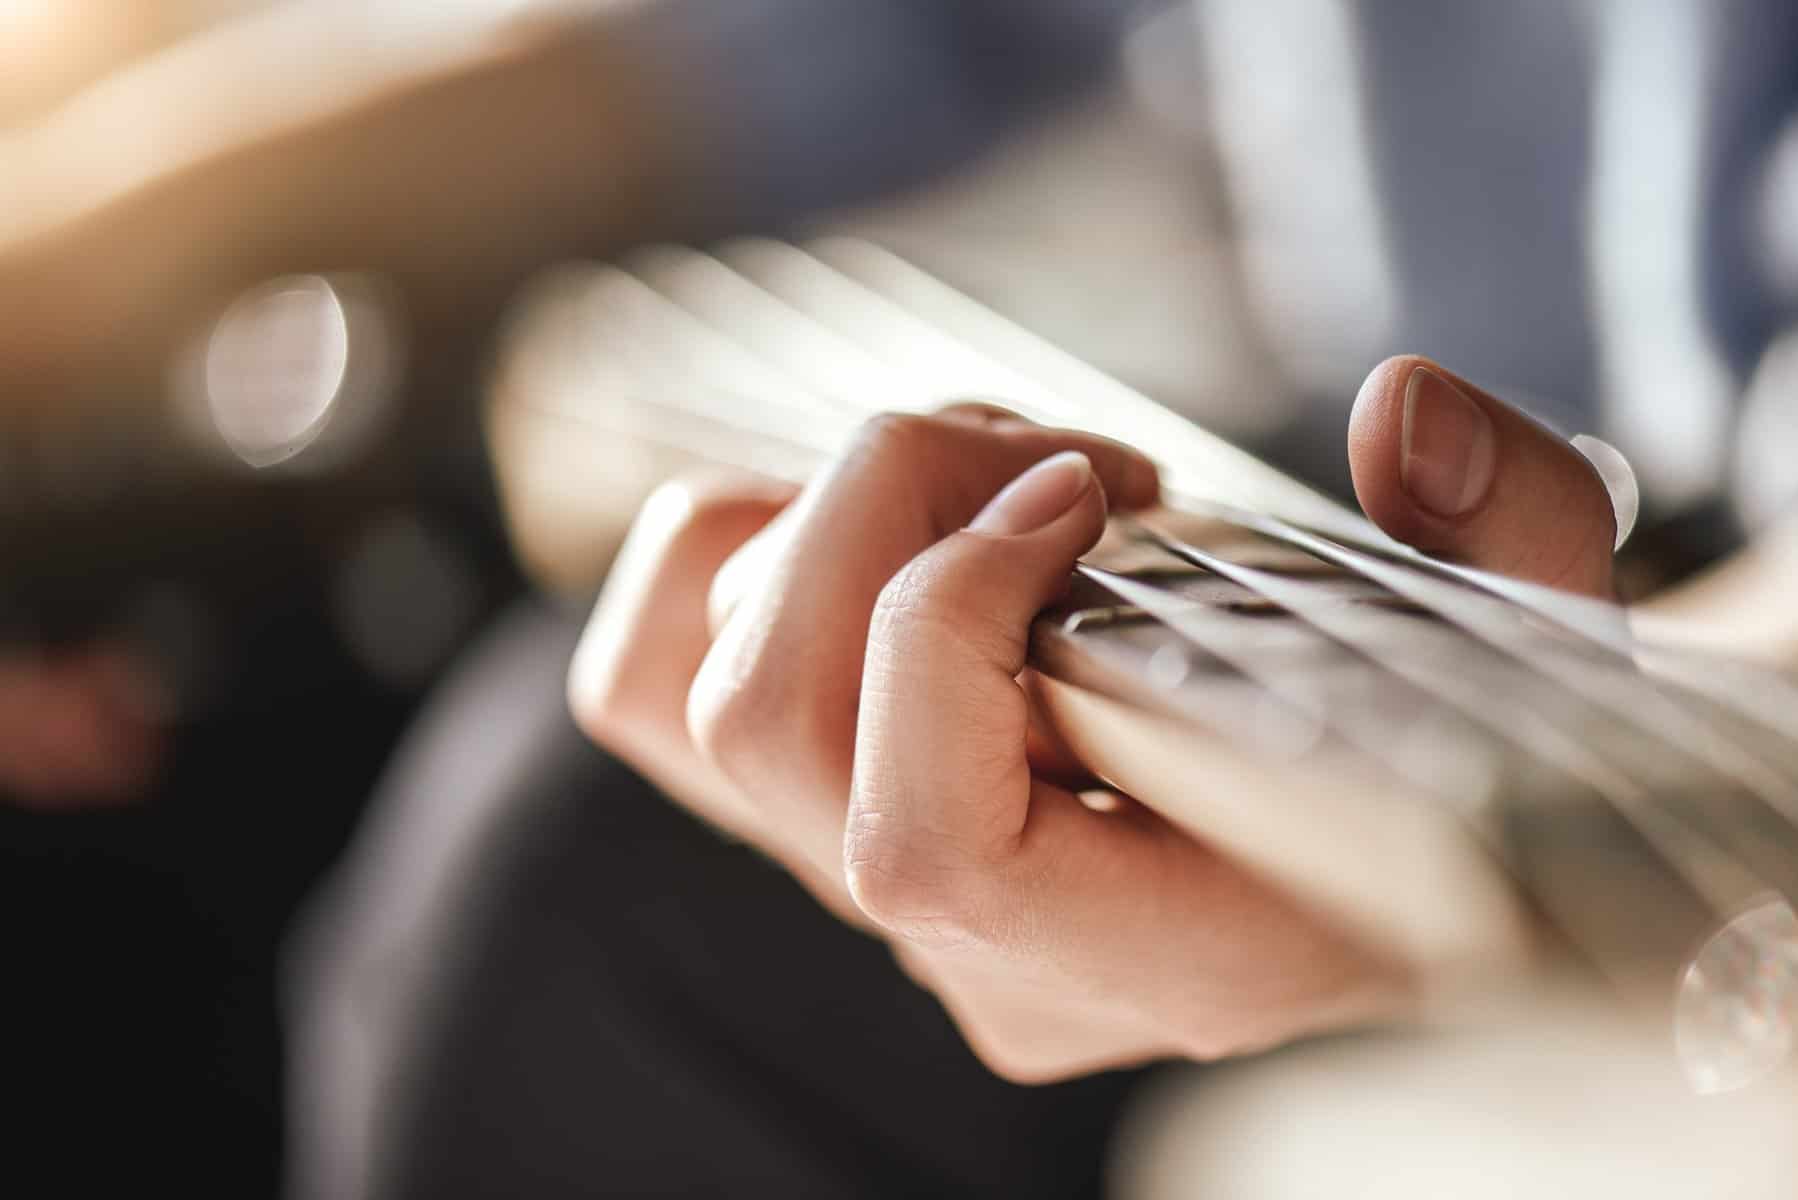 Guitar lessons. Close-up photo of male playing guitar